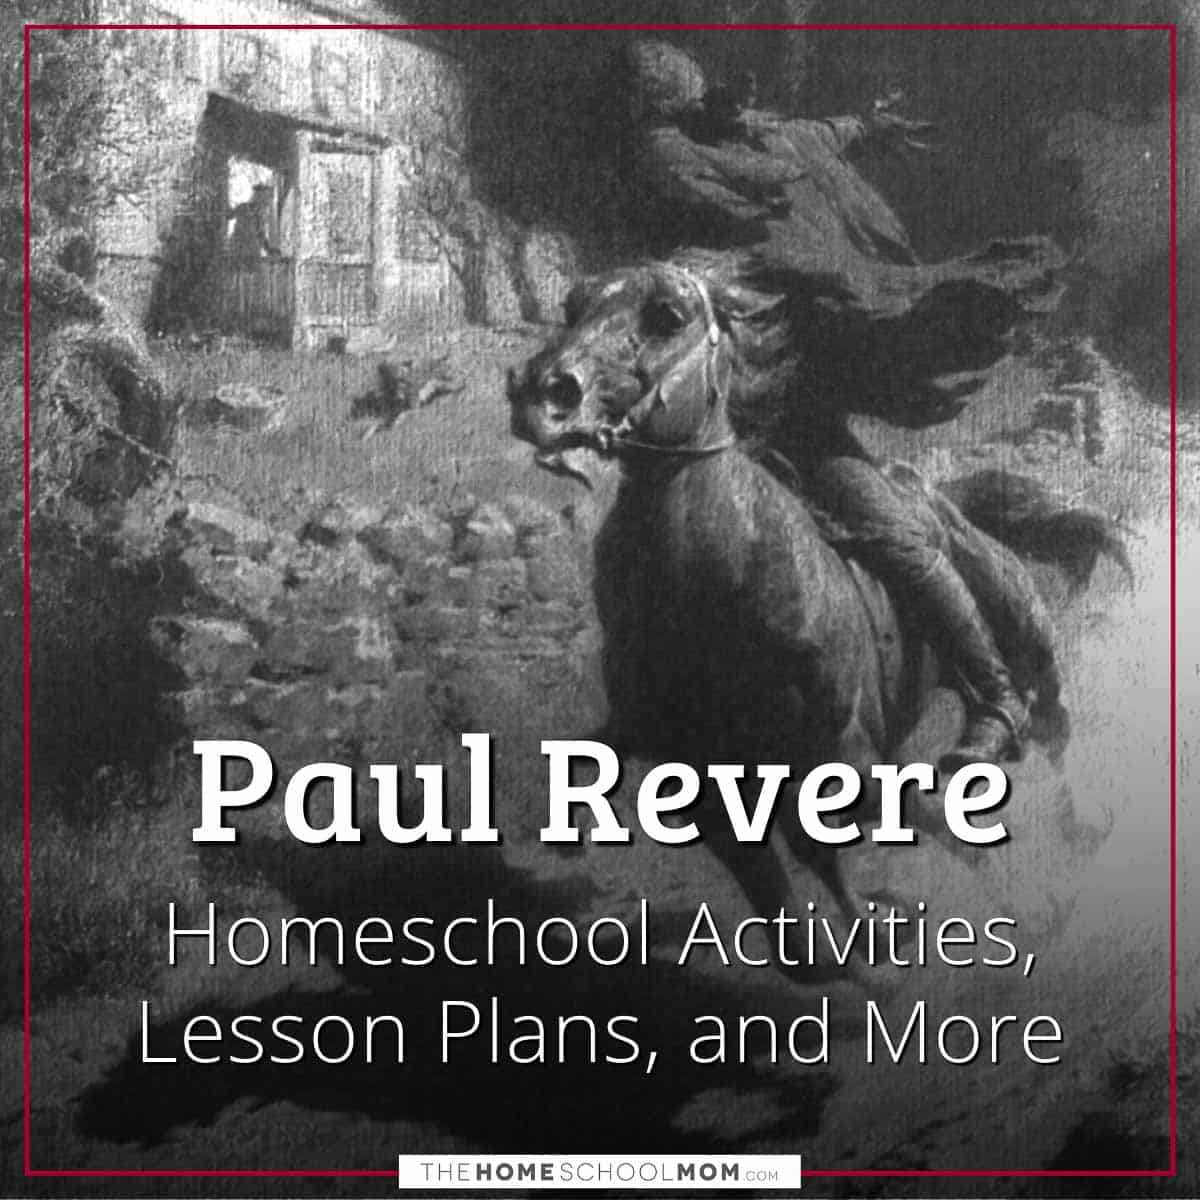 Paul Revere Homeschool Activities, Lesson Plans, and More.